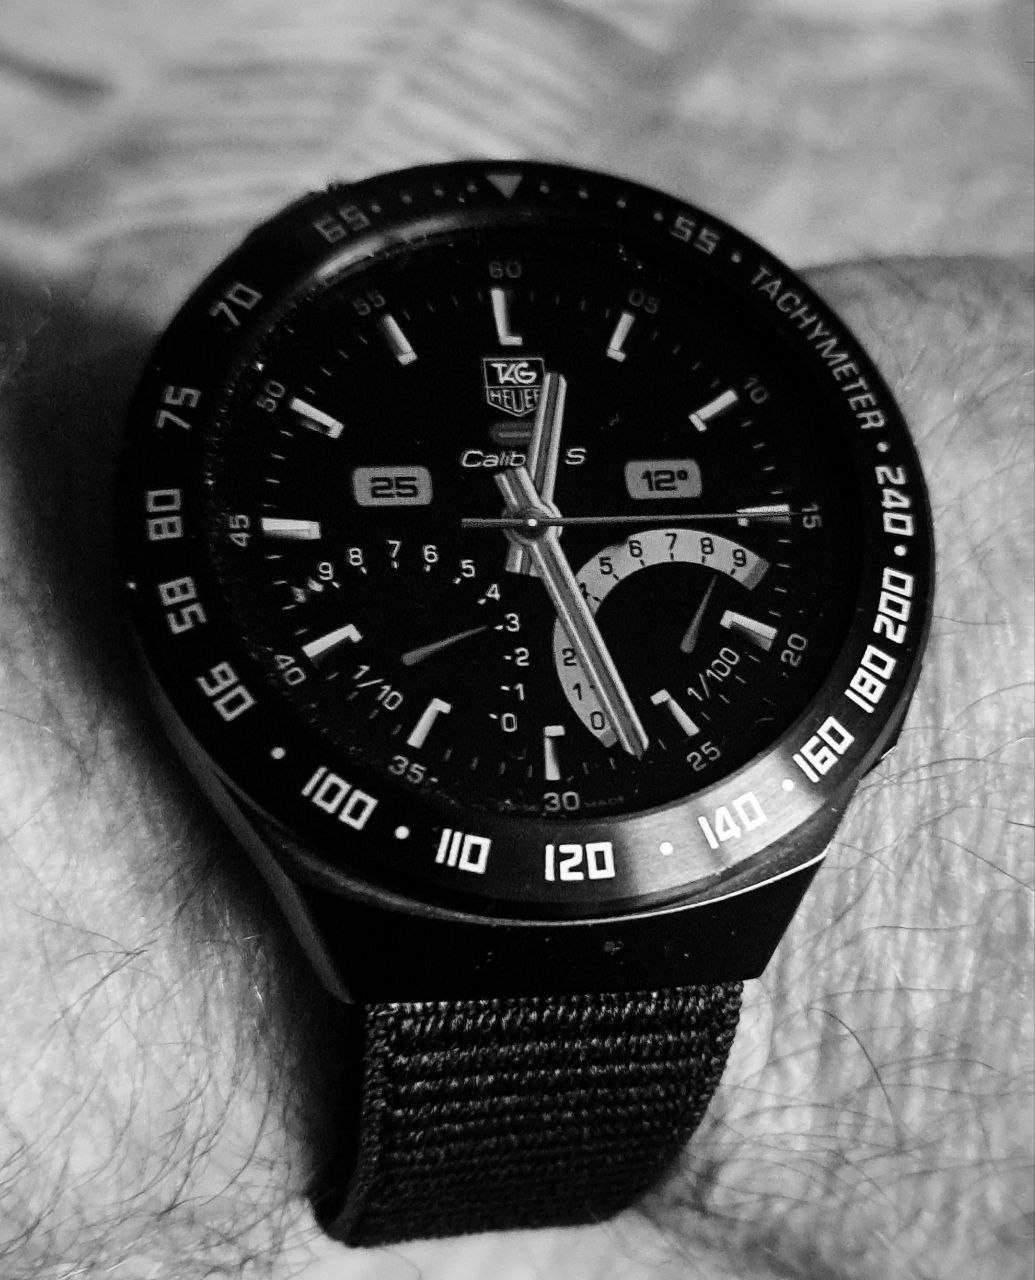 Carrera tag heuer HQ realistic watch face theme